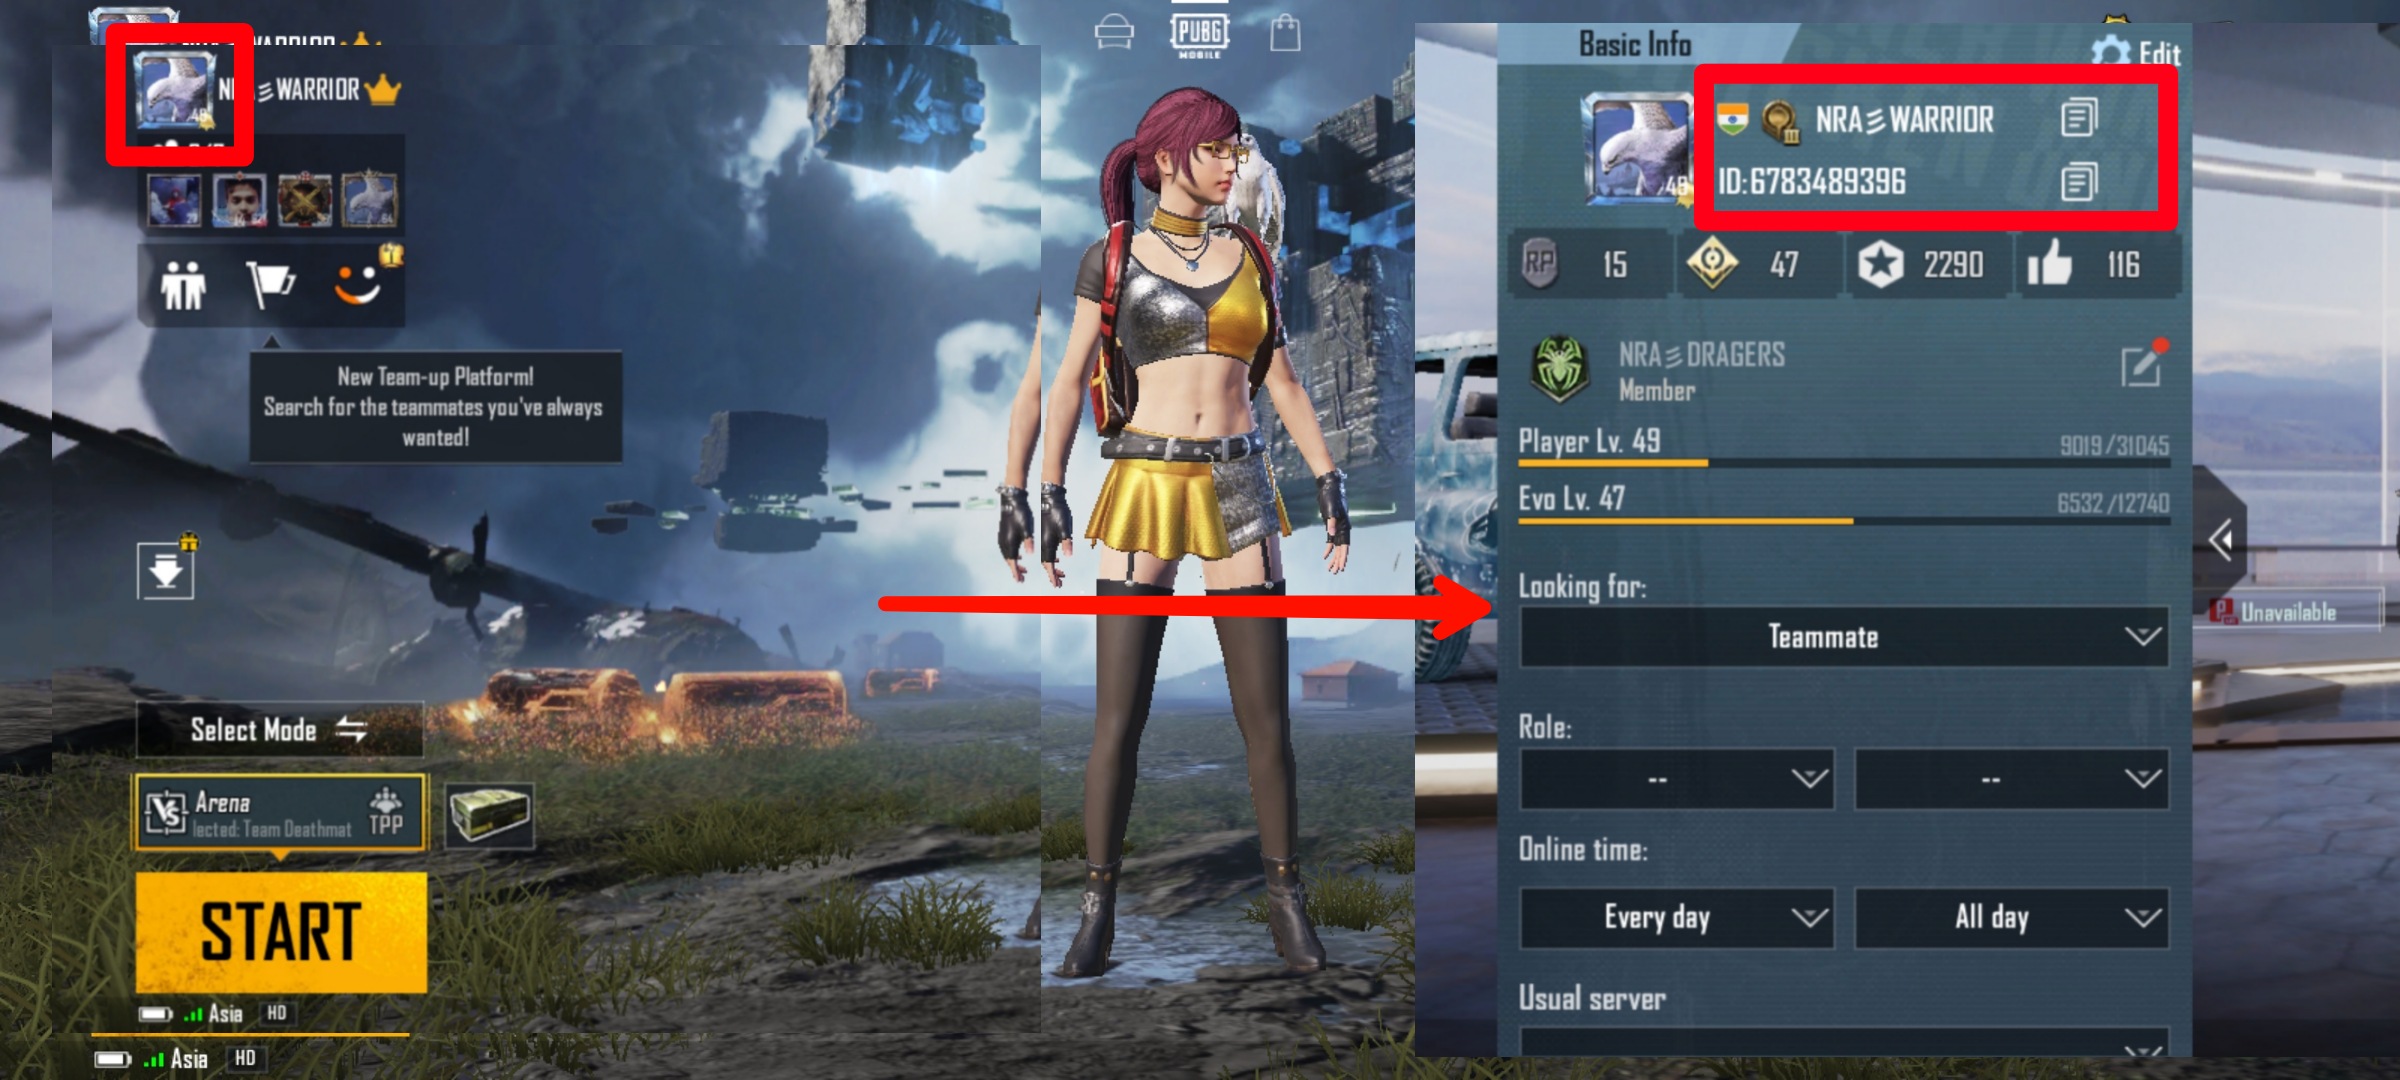 how to find Pubg m player id